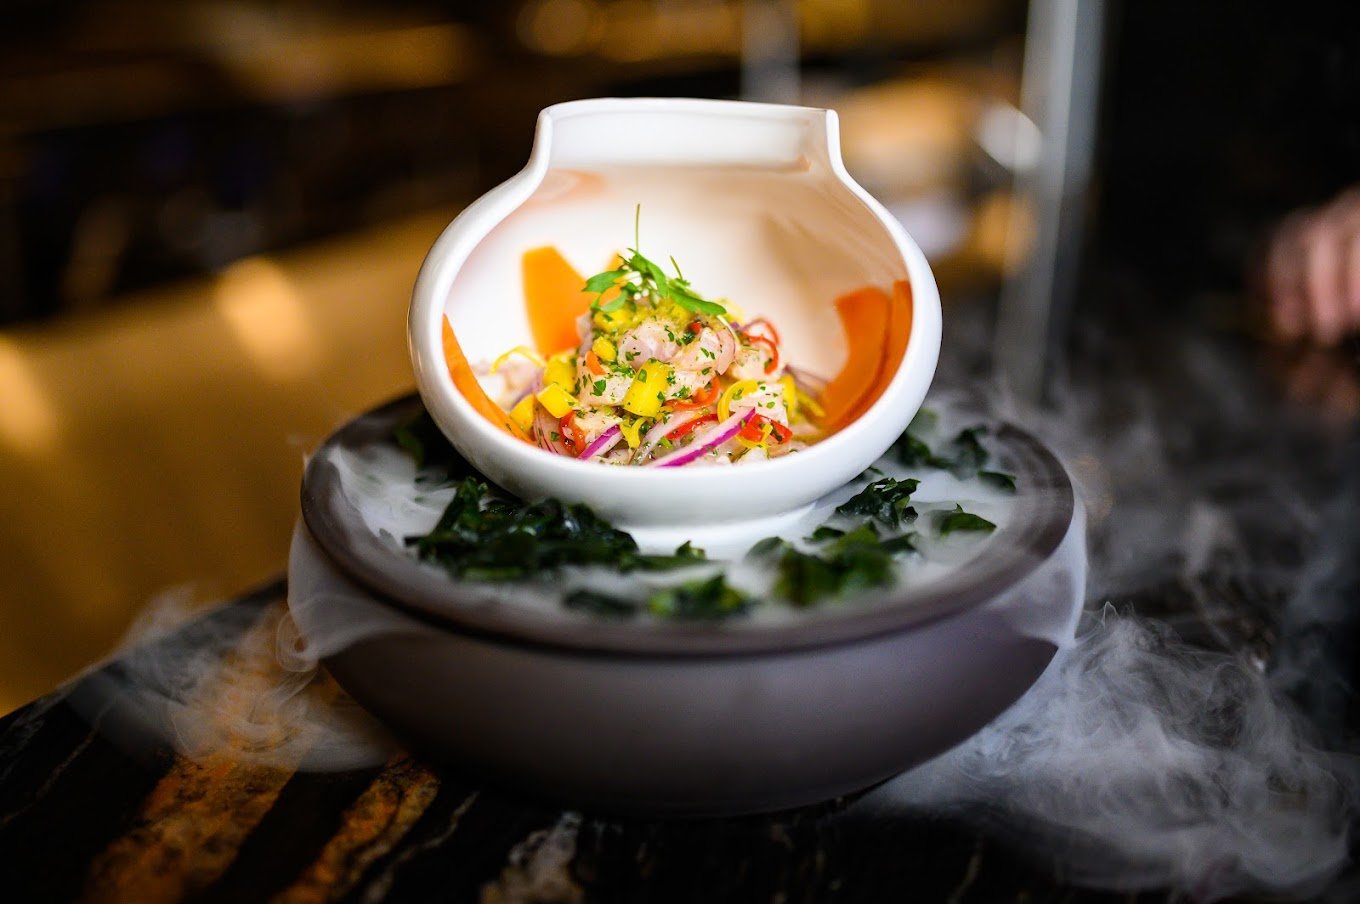 ceviche in a white bowl with dark background